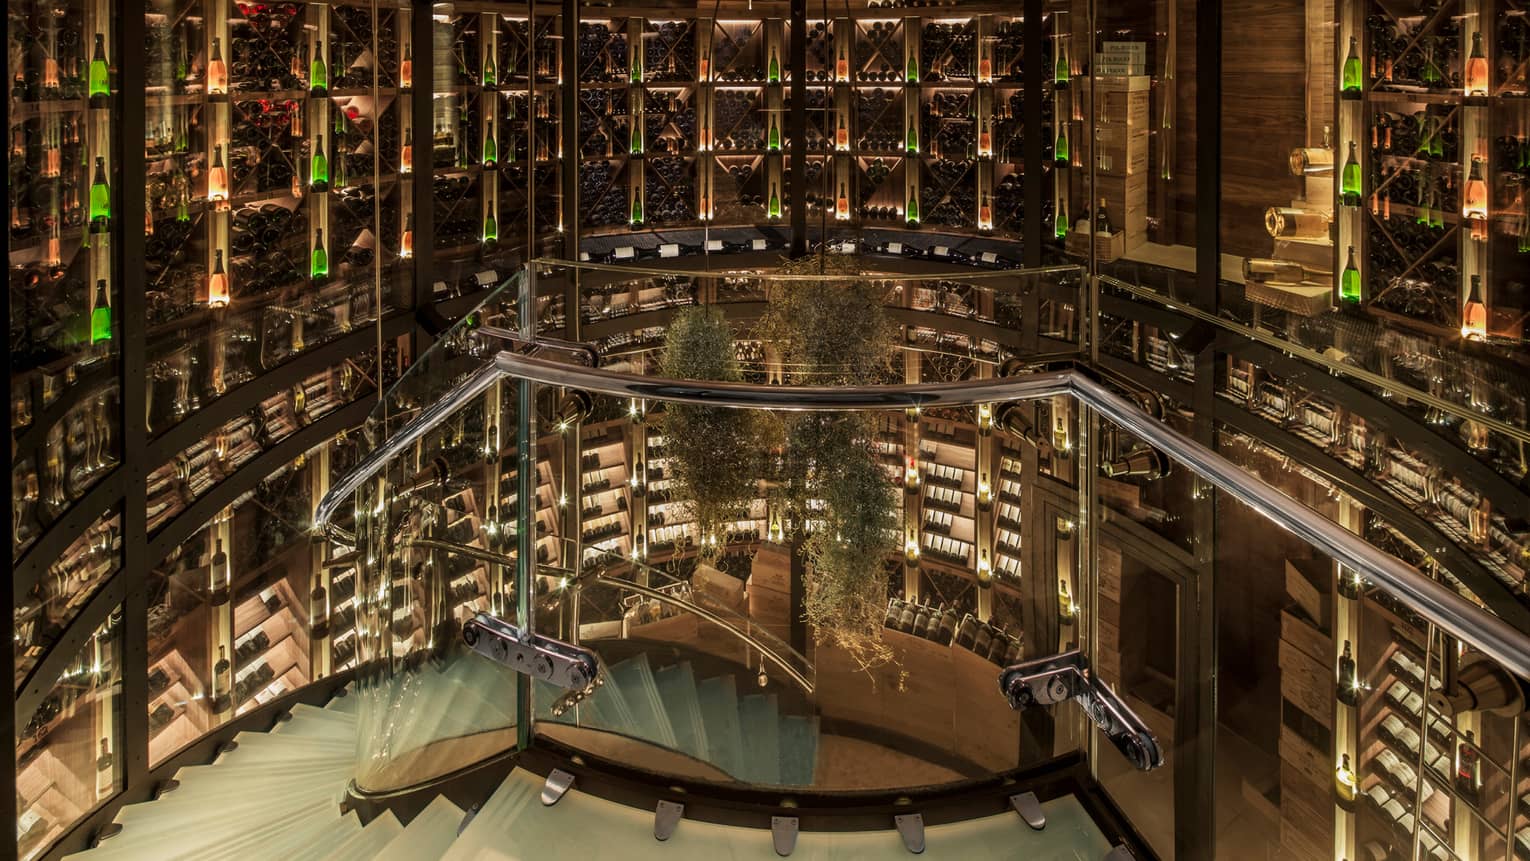 Spiral, glass staircase winding through multi-level wine cellar